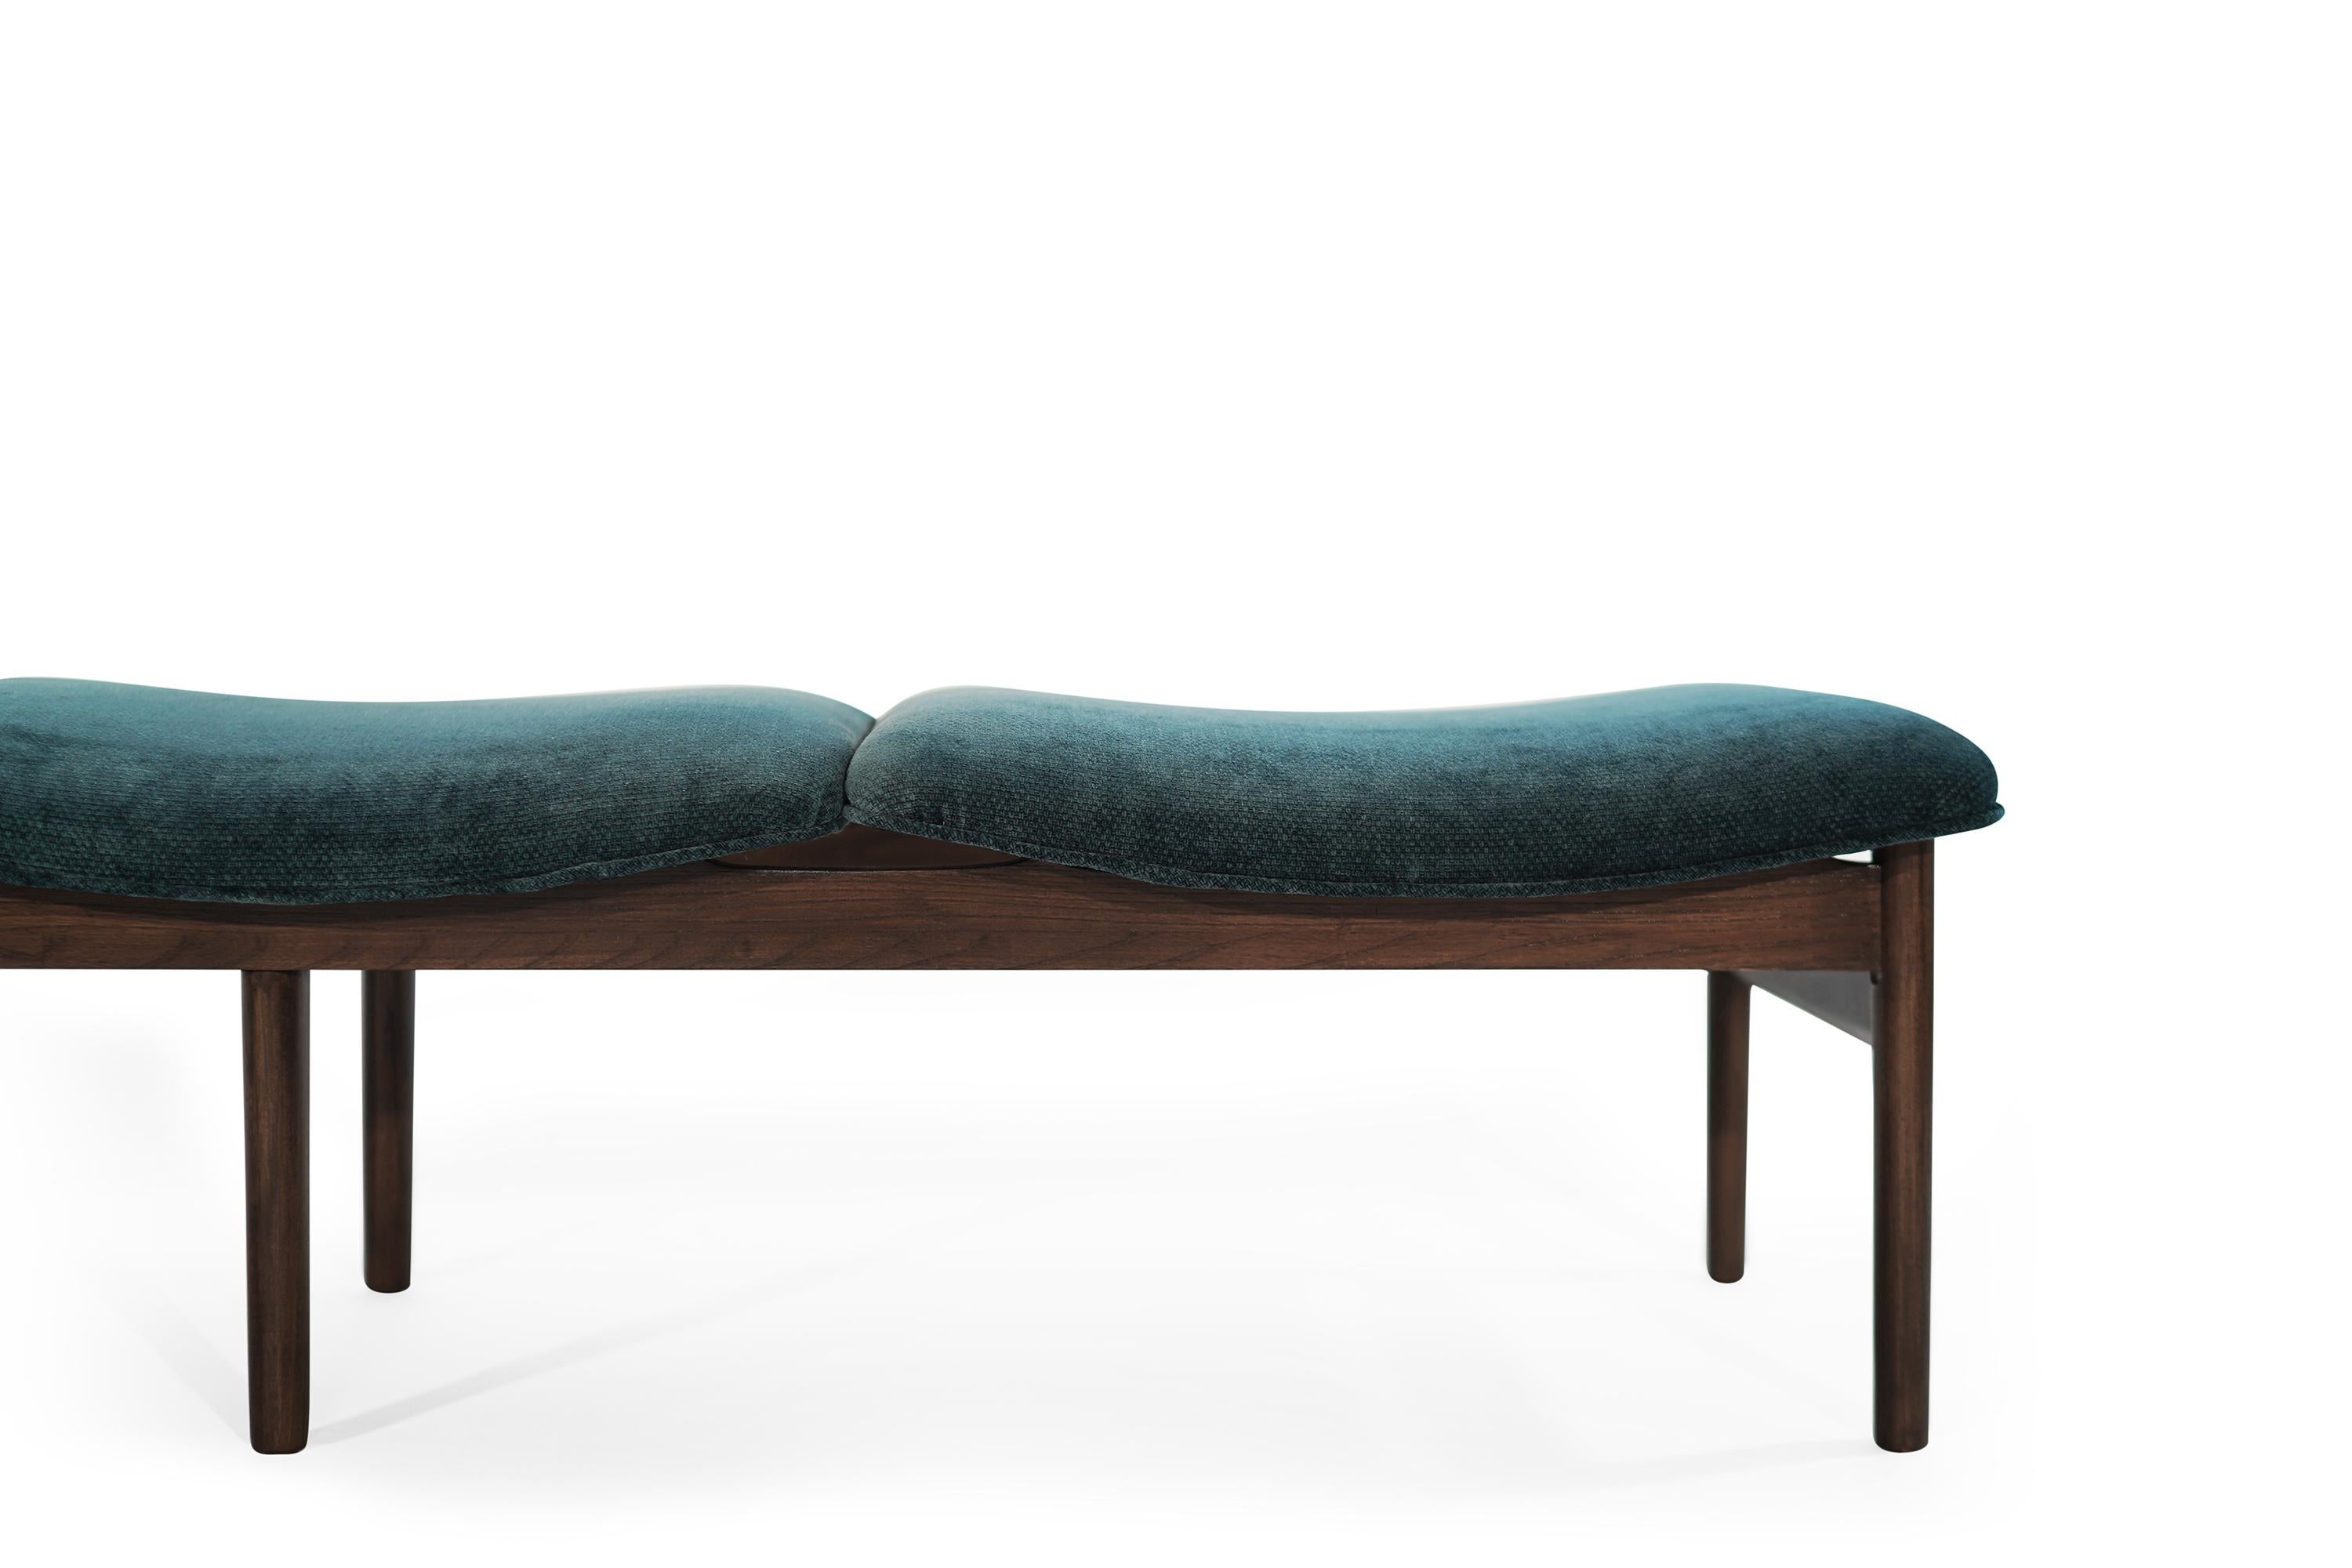 Lawrence Peabody Bench in Teal Twill, 1950s 1